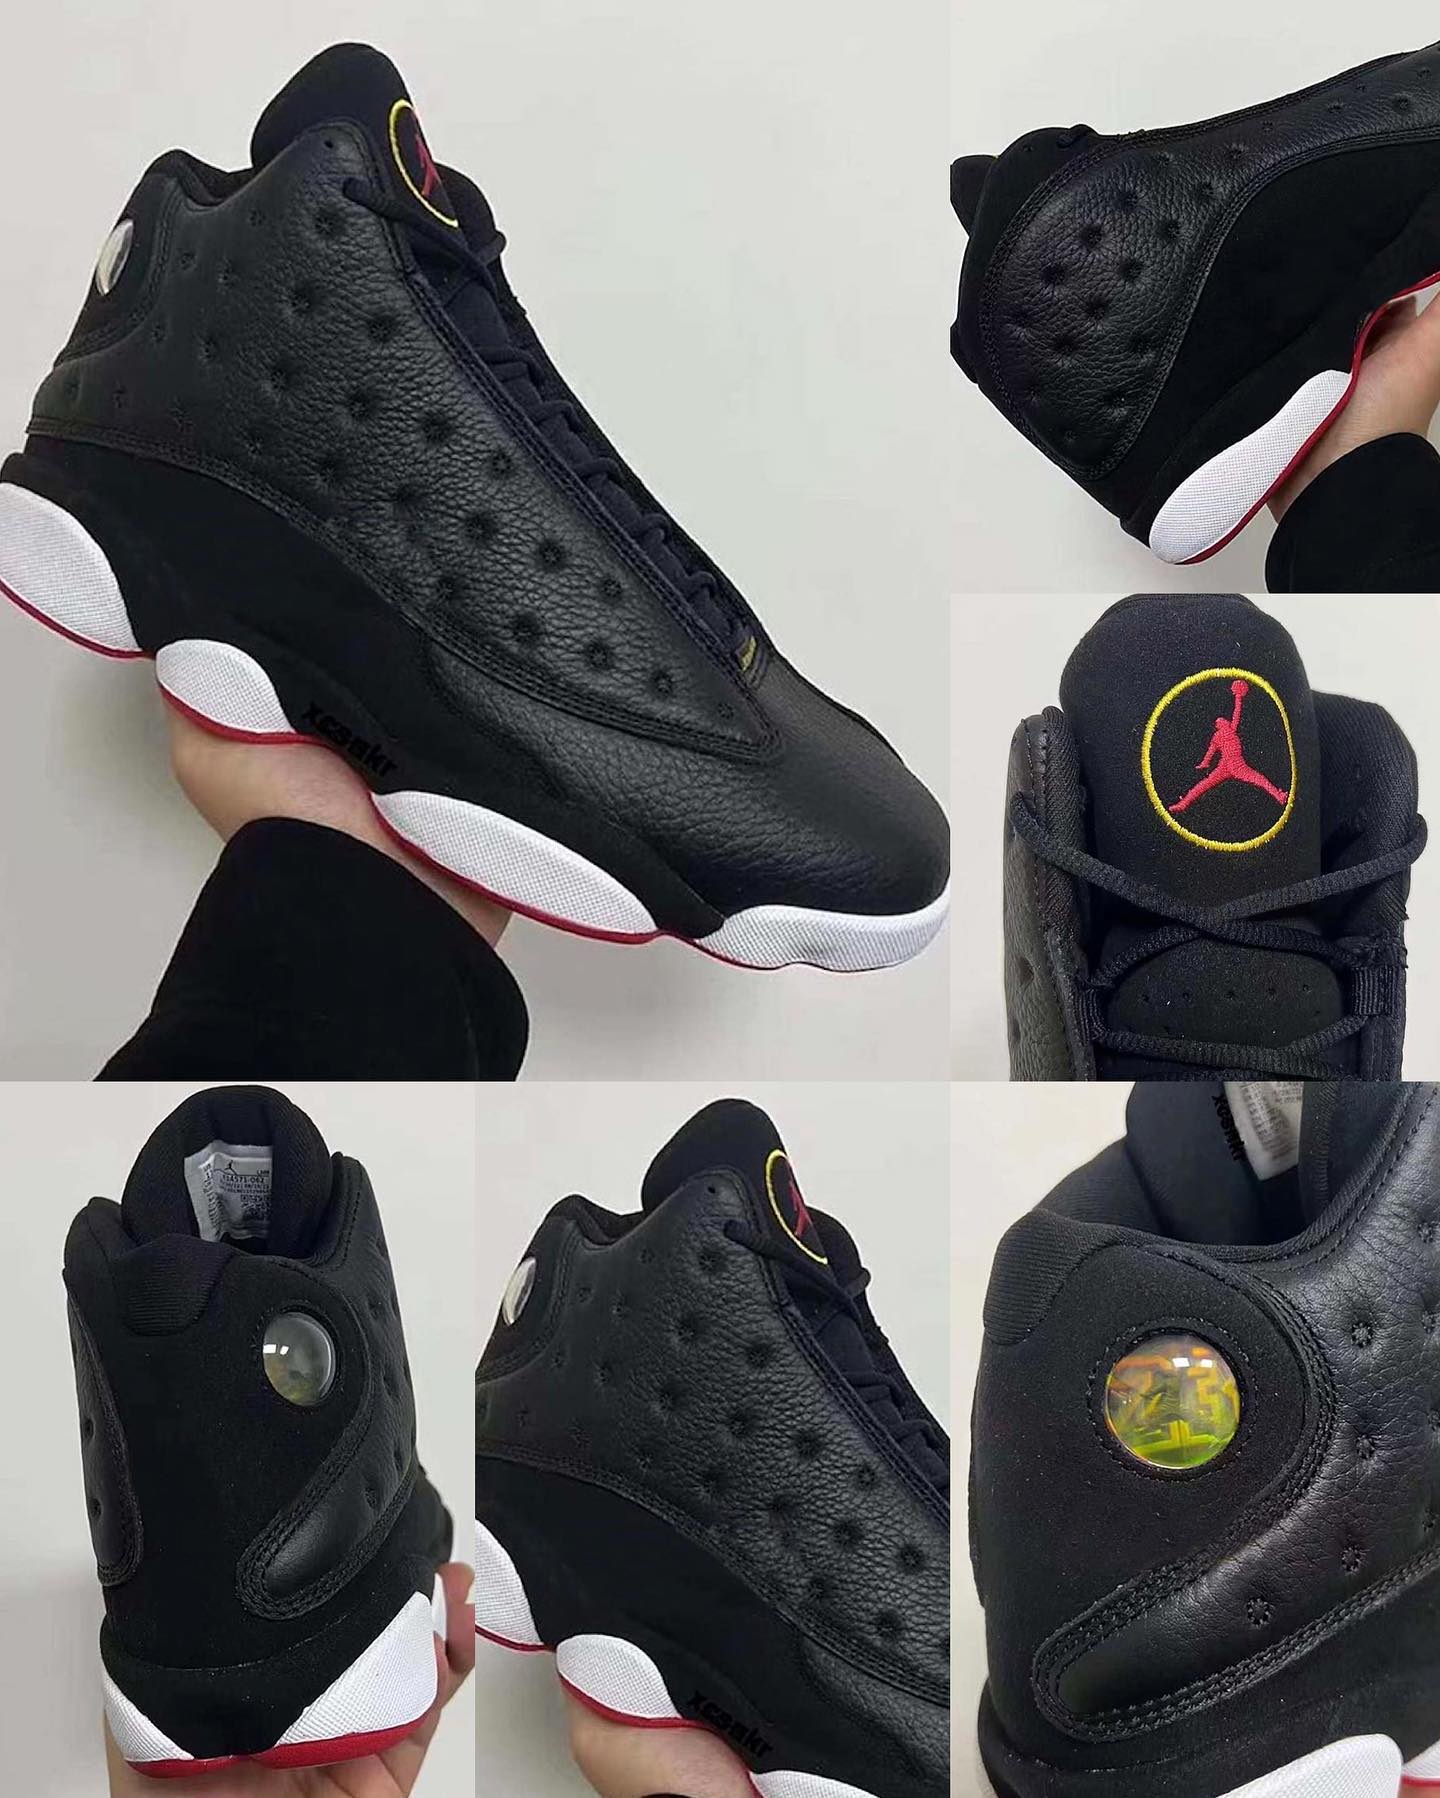 First Look at the 2023 'Playoffs' Air Jordan 13 The OG colorway is